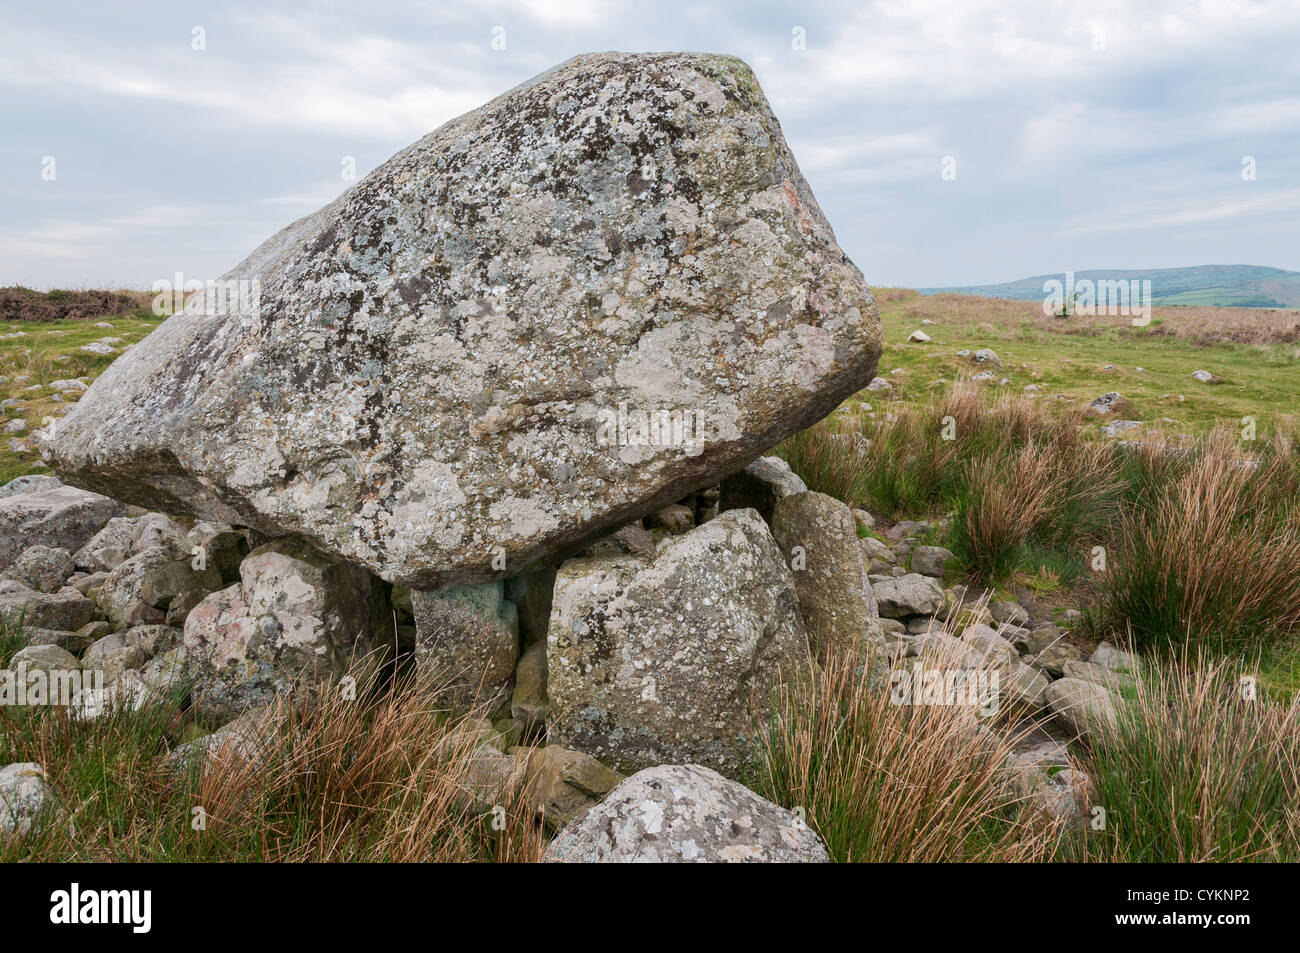 Wales, Gower Peninsula, Cefn Bryn, Arthur's Stone, Neolithic burial portal tomb dates from 2500 B.C. Stock Photo